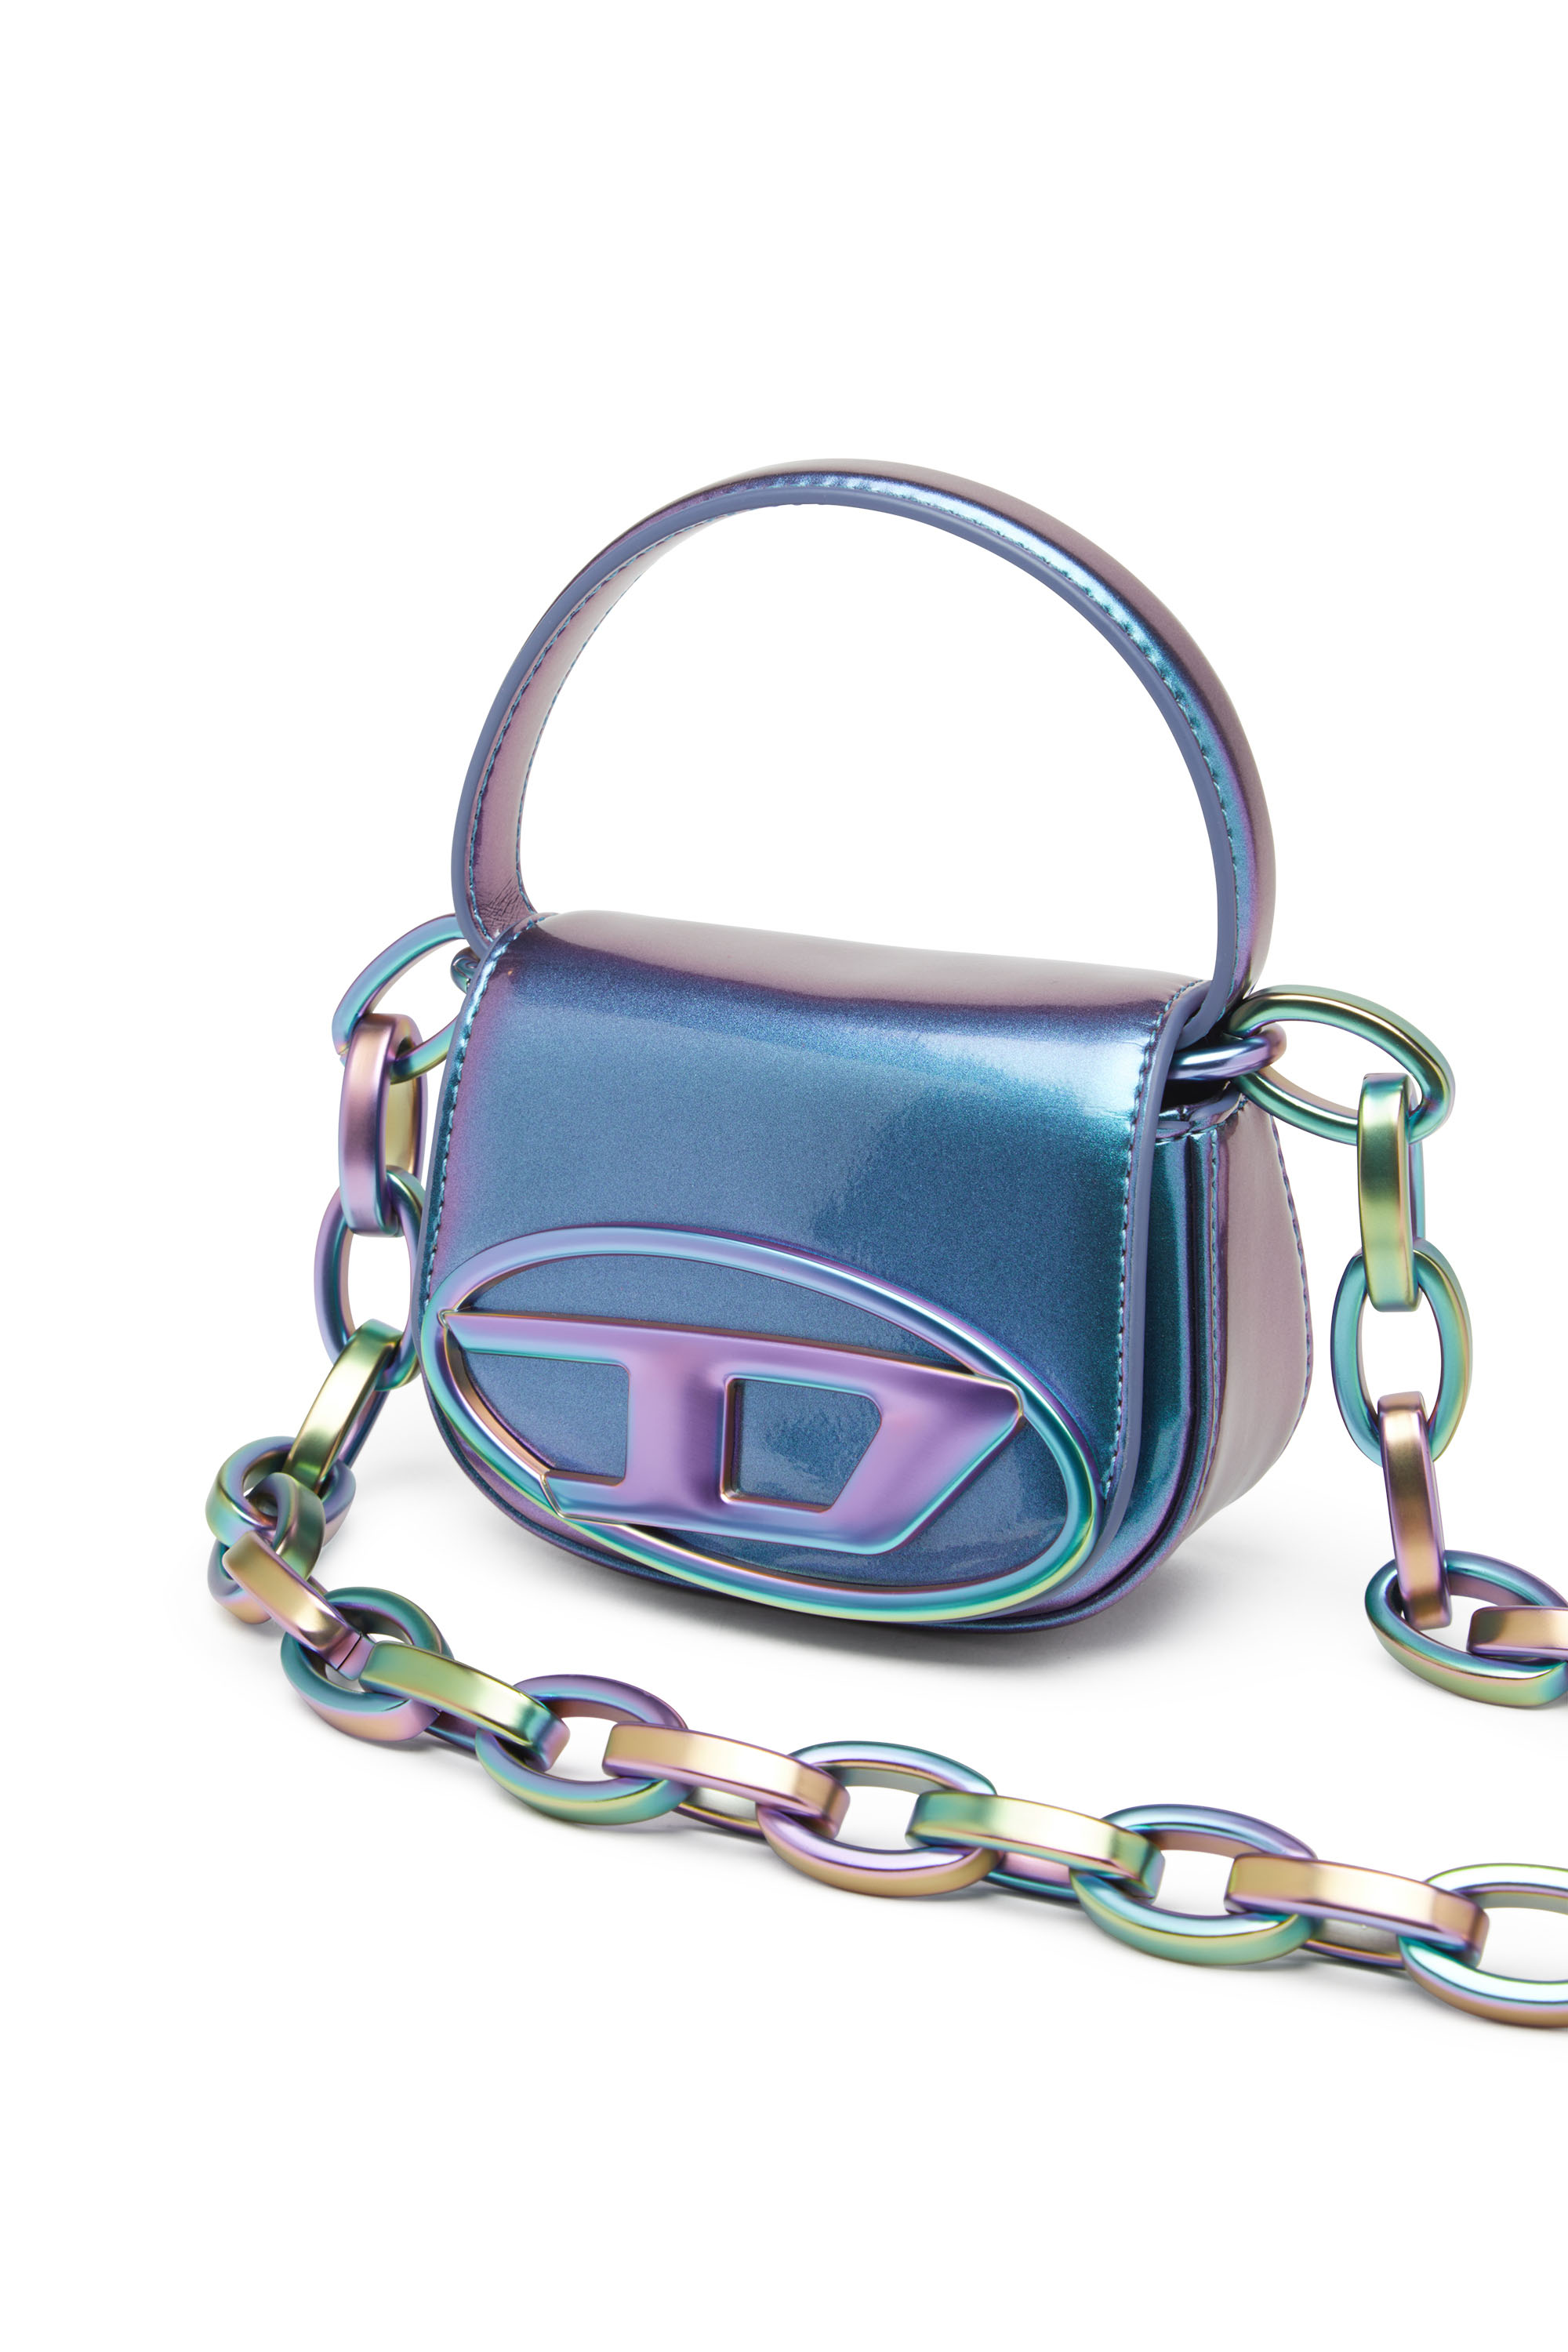 Diesel - 1DR XS, Woman 1DR XS-Iconic iridescent mini bag in Blue - Image 5